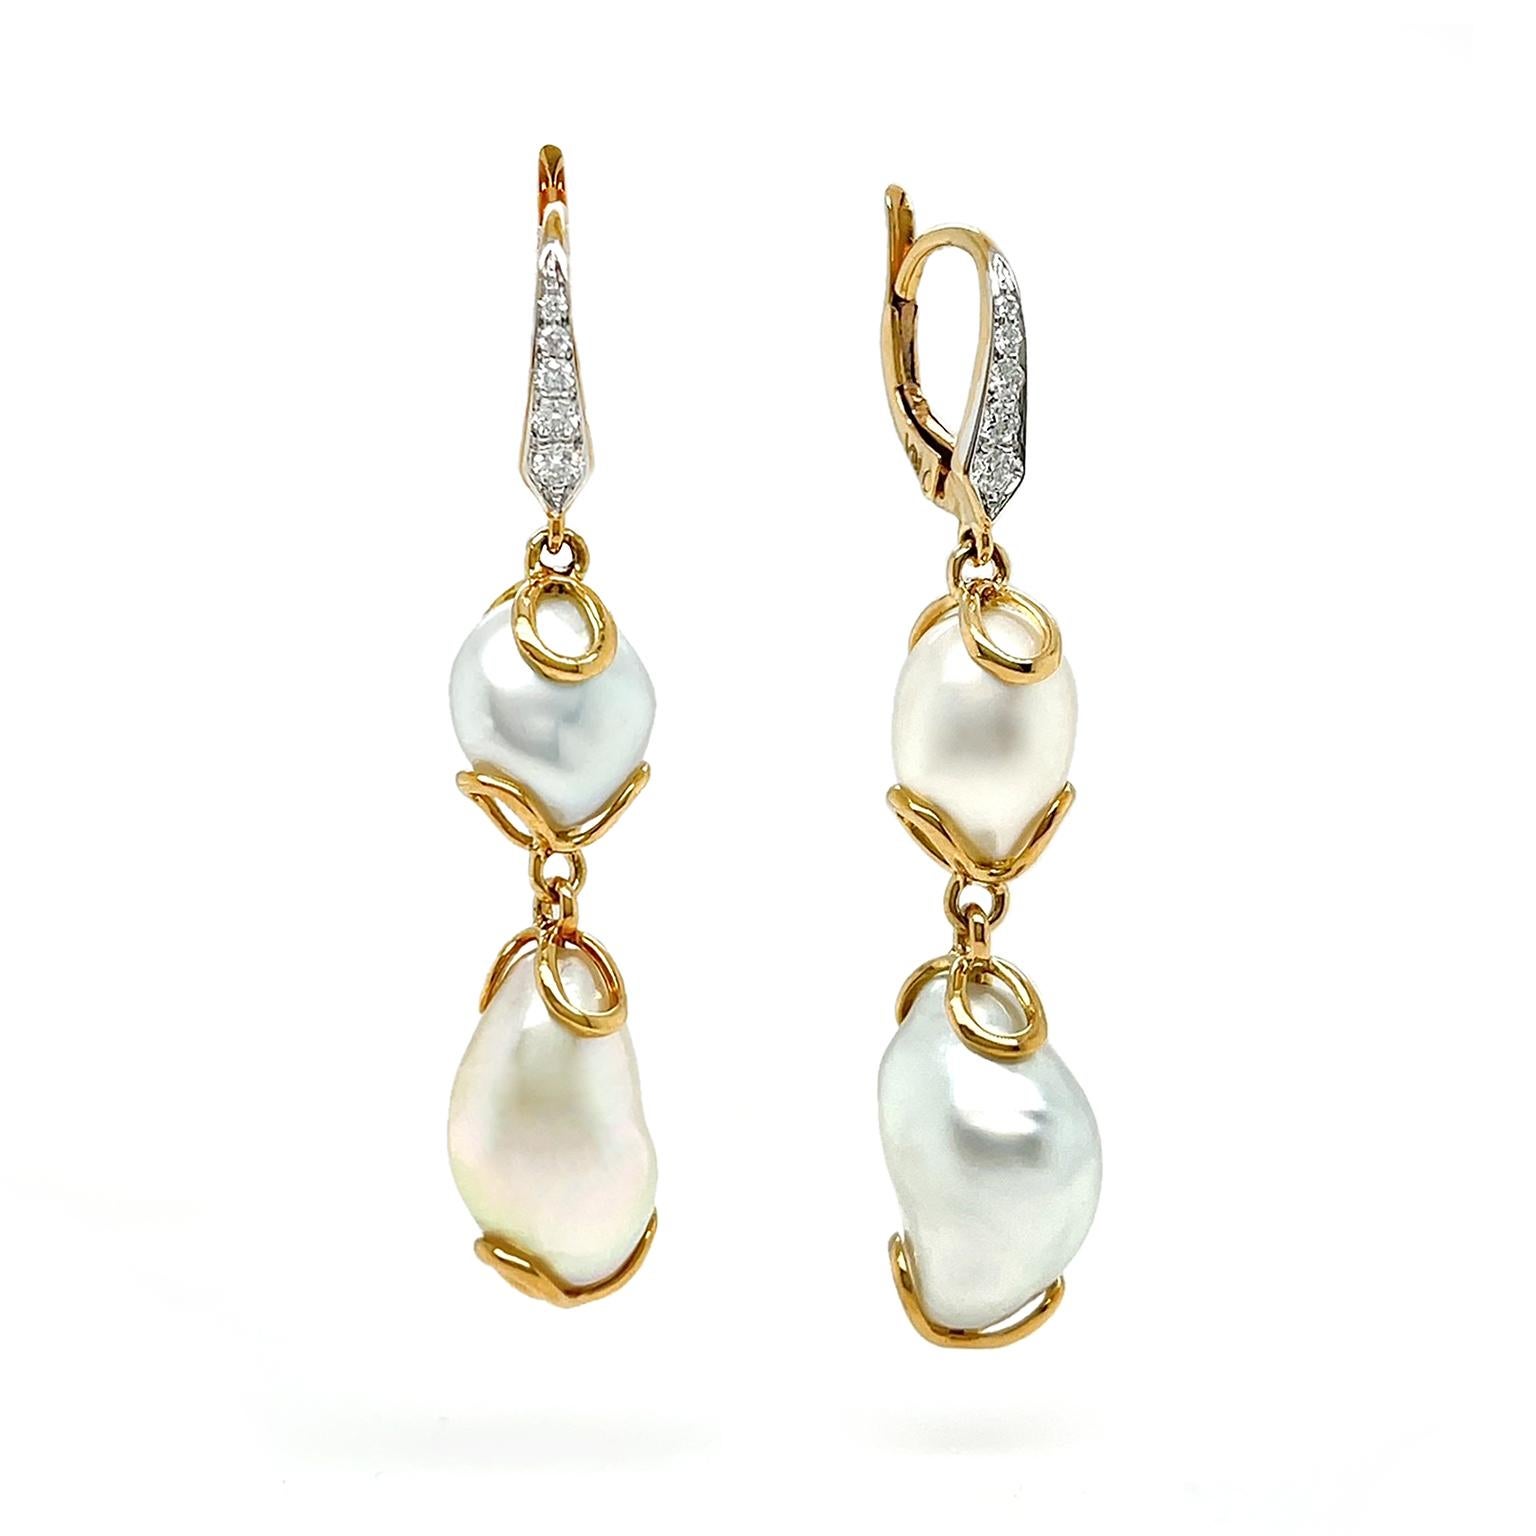 The varied shades of white keshi pearls display its elegance in these earrings. Diamond pave set 18k yellow gold lever backs connect to gold loops securing a smaller oval shape pearl, while another set of gold loops secure a more elongated shape